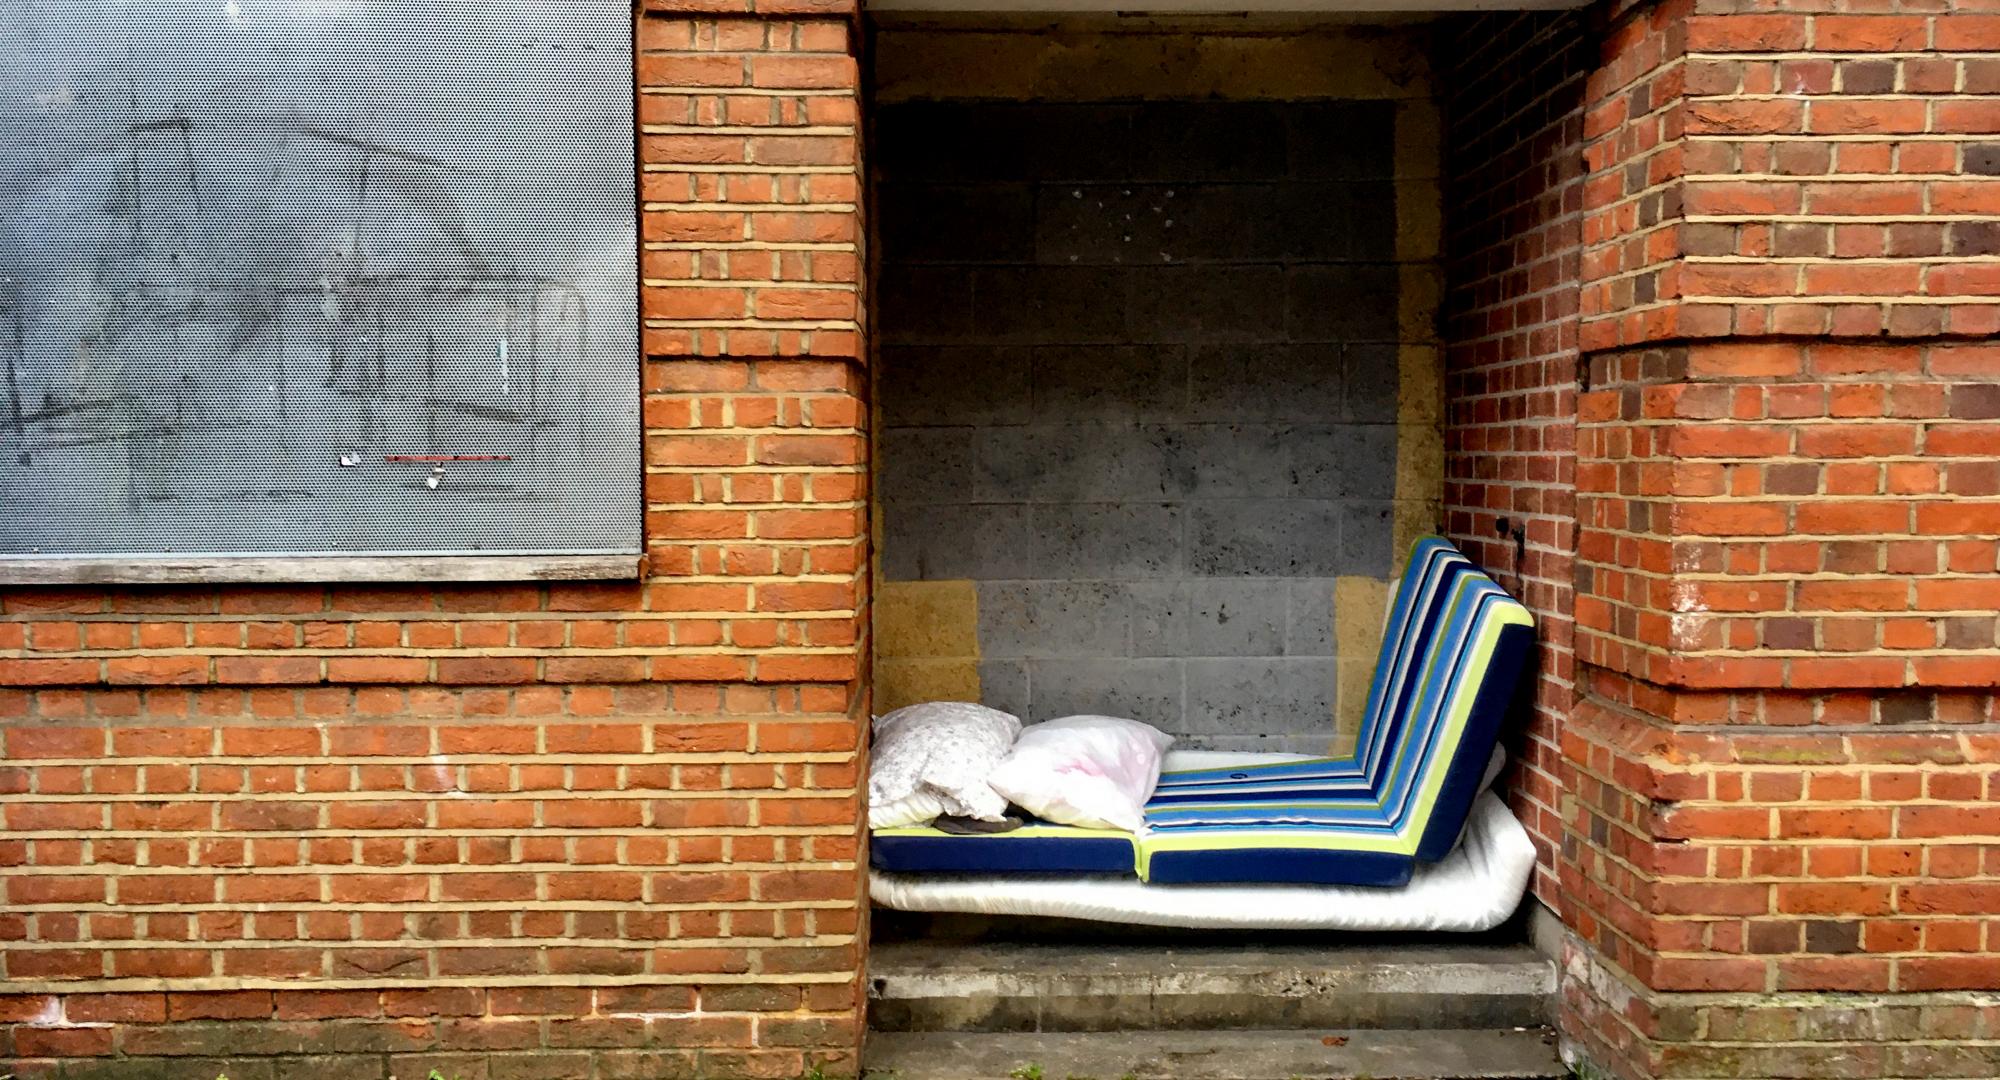 Mattresses stacked up in a doorway by a rough sleeper